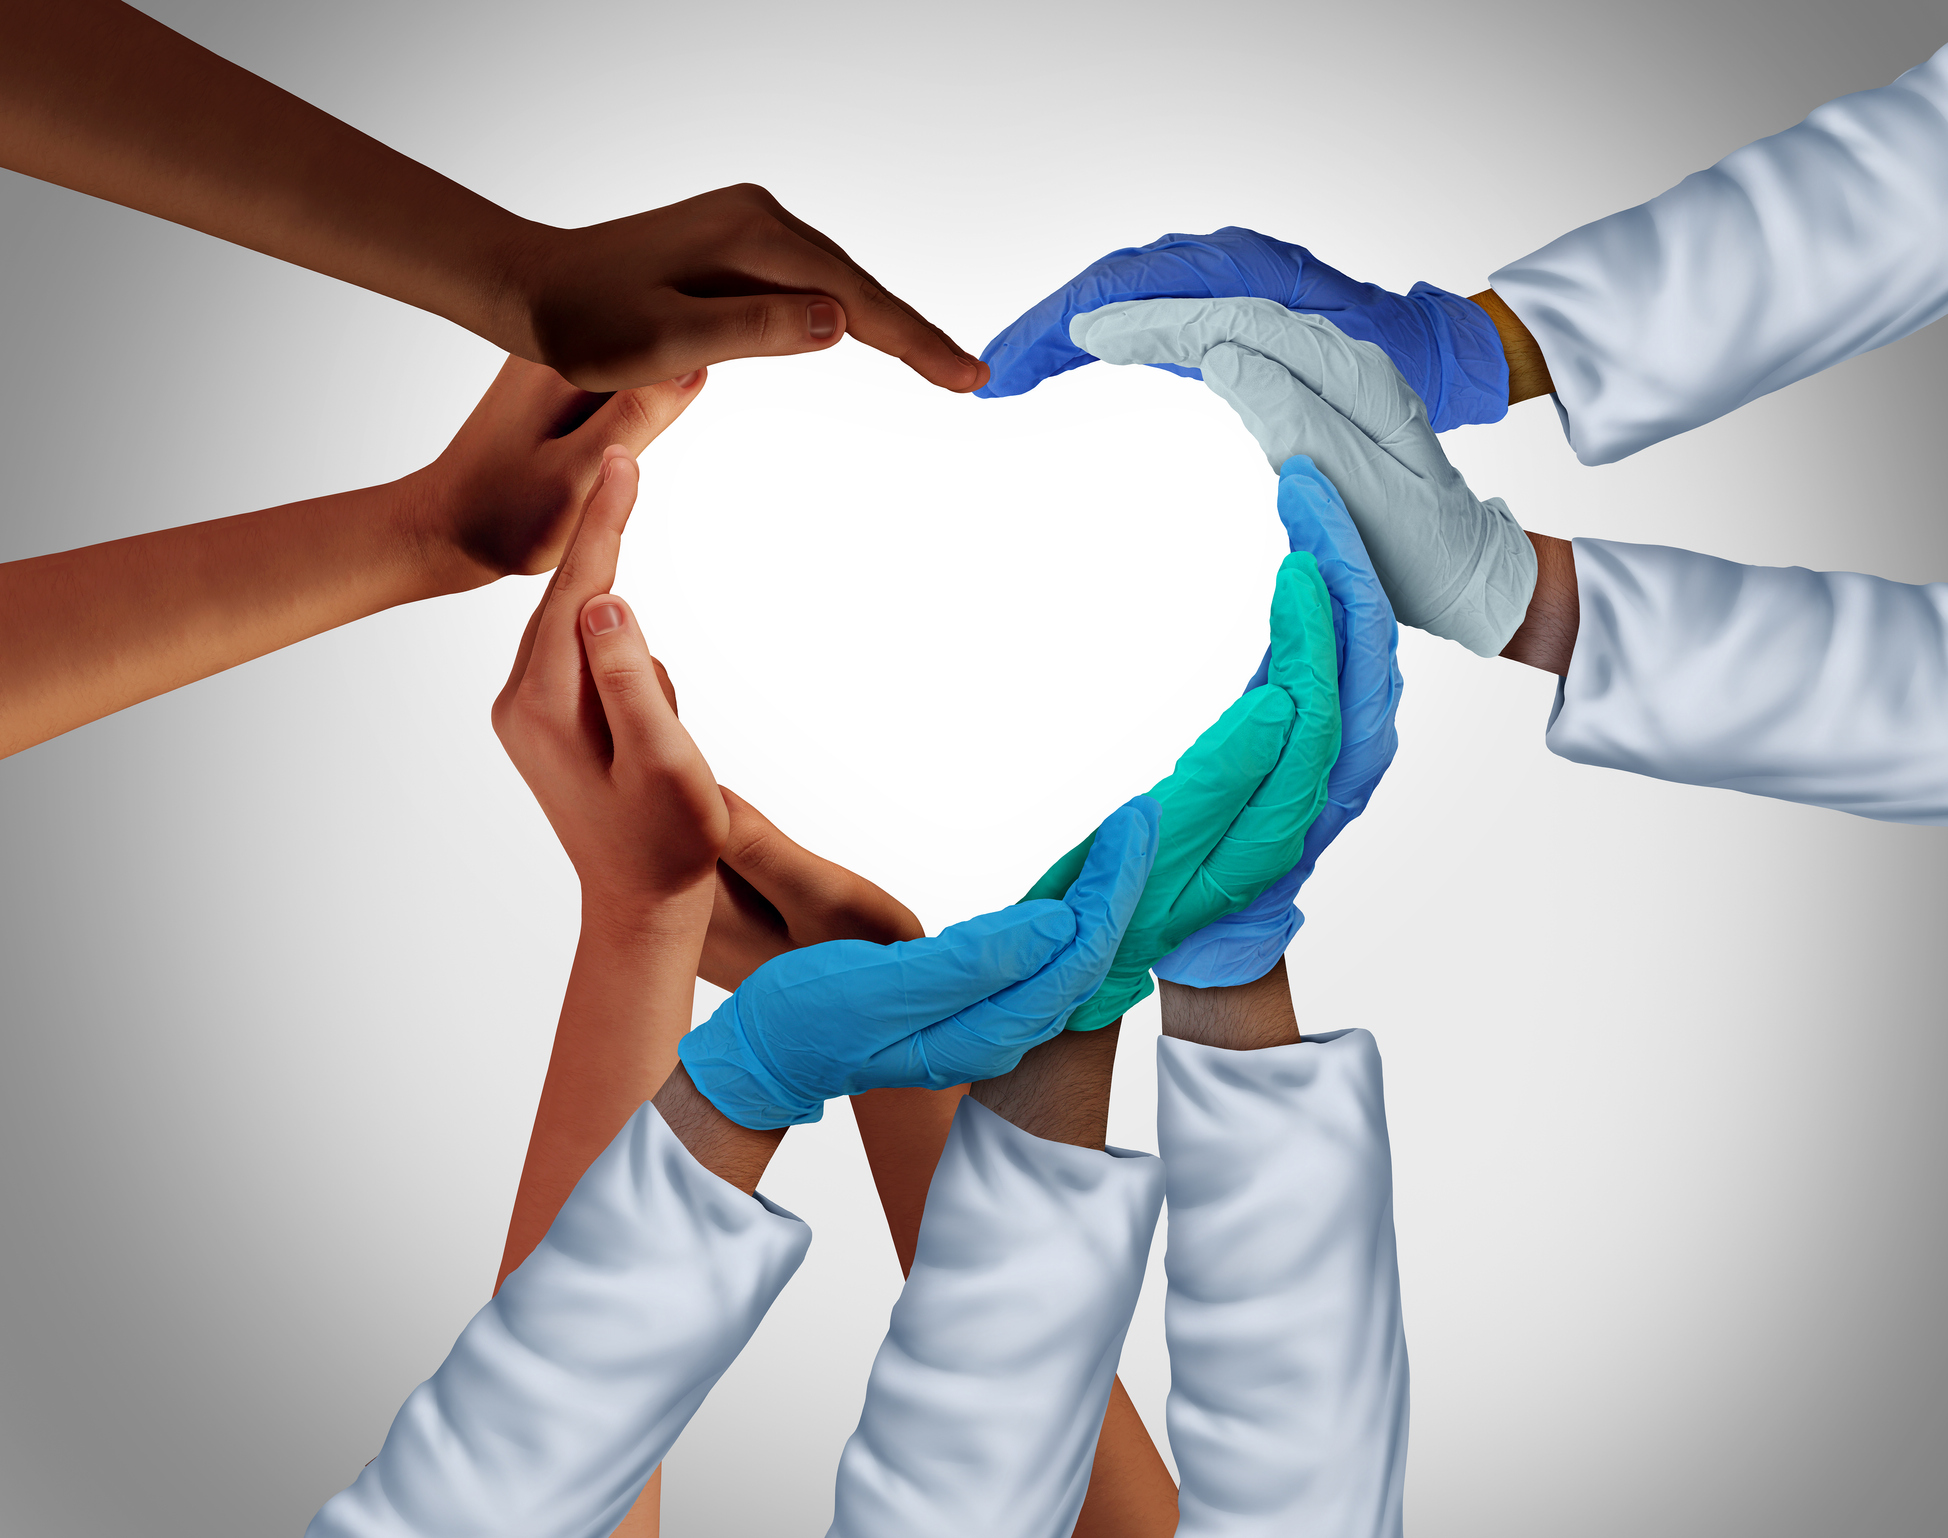 Medical Team with hands together forming a heart